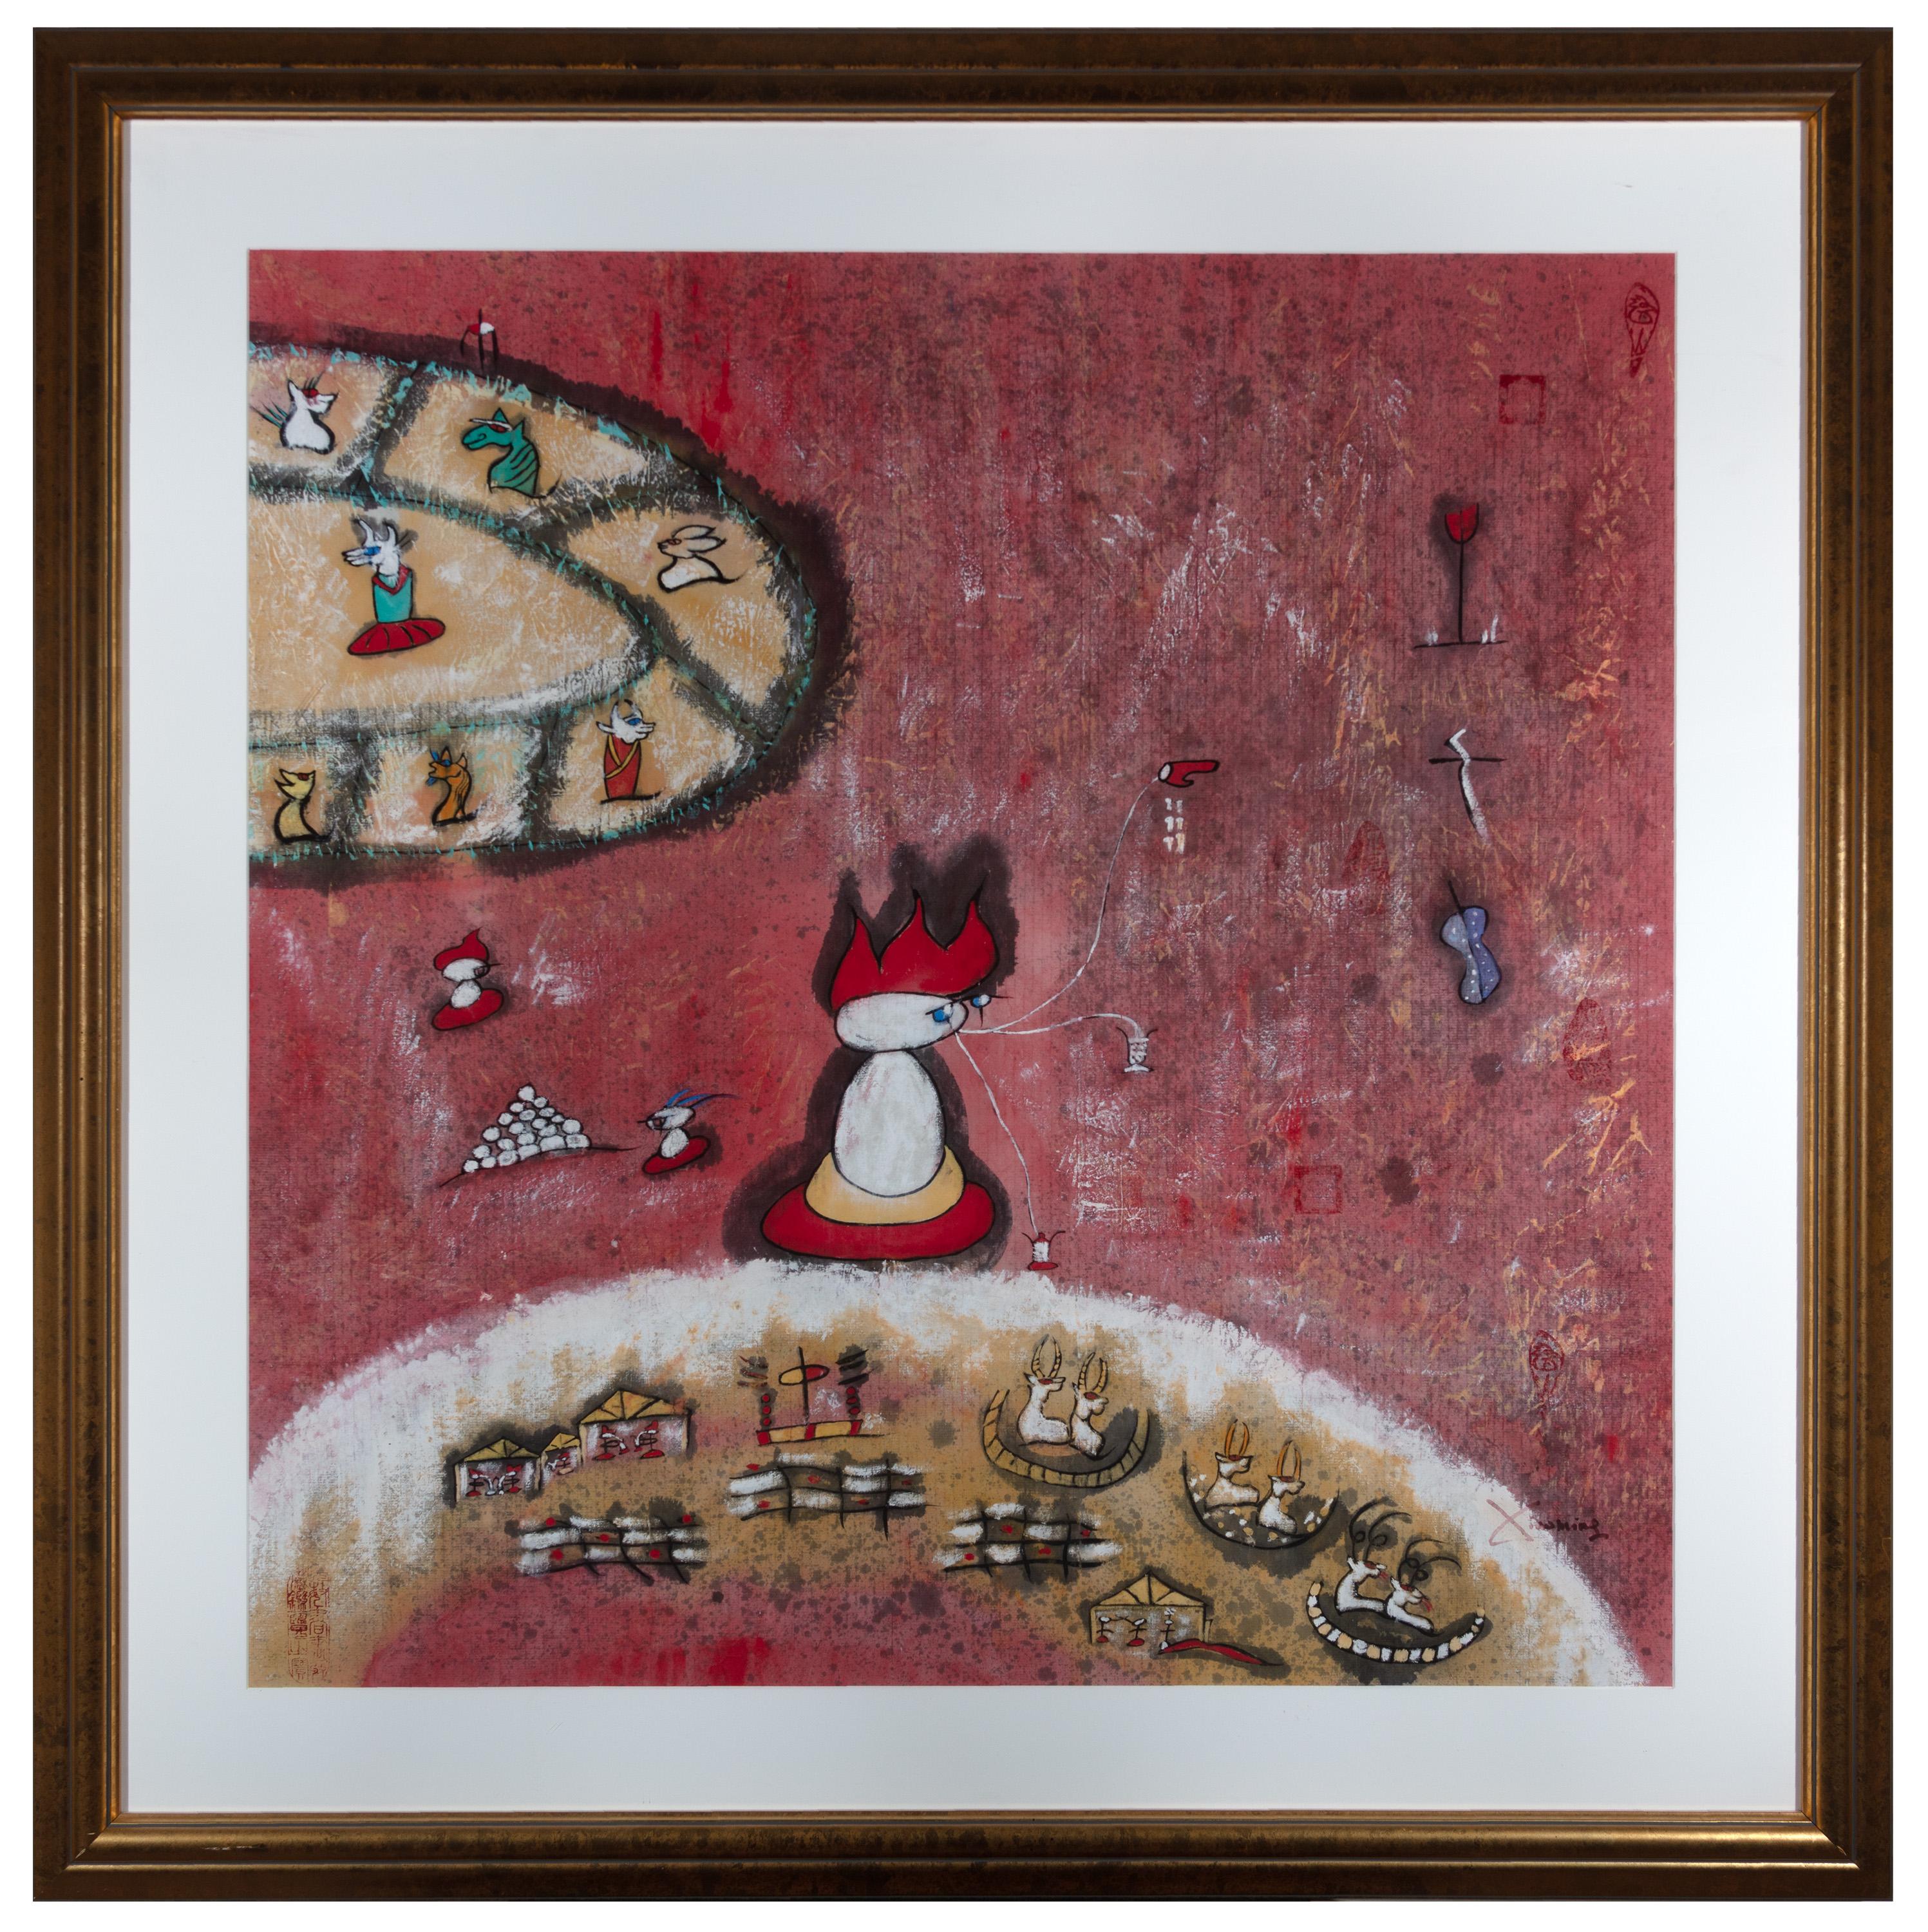 "Any Life of Home, " Mixed Media Painting on Paper, Signed - Mixed Media Art by Xiao Ming